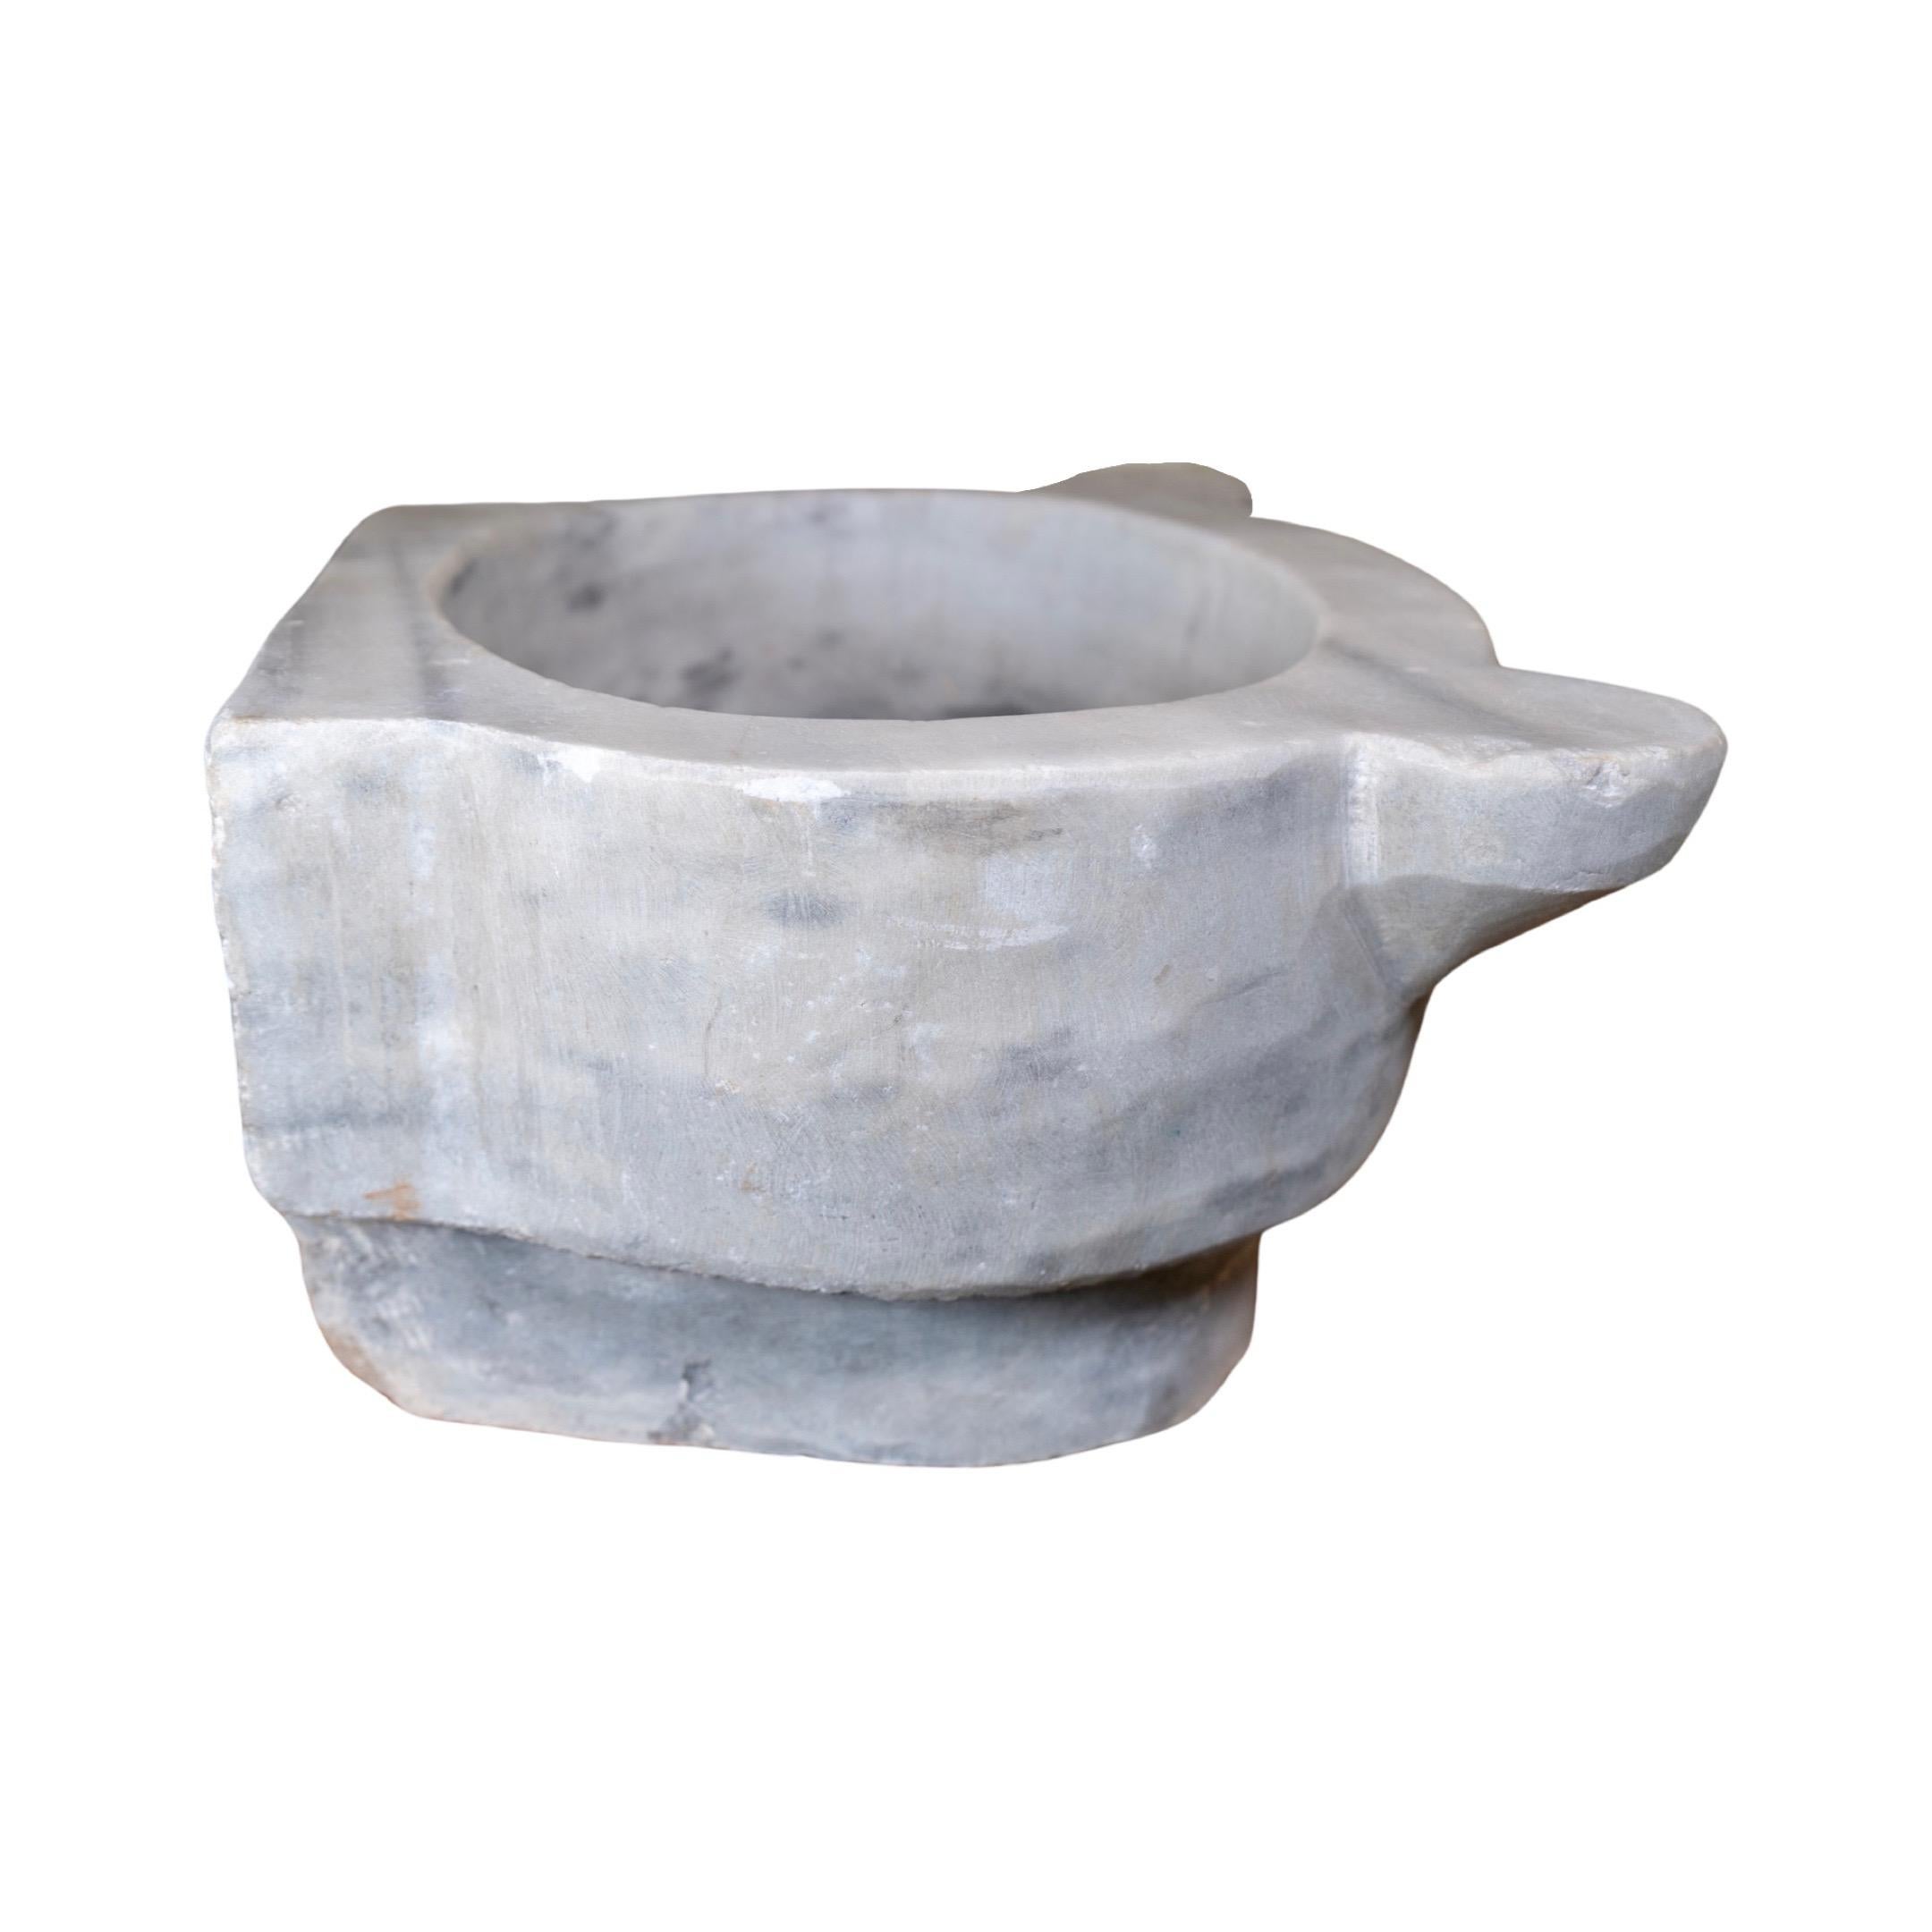 Mid-19th Century Greek White Marble Sink For Sale 3